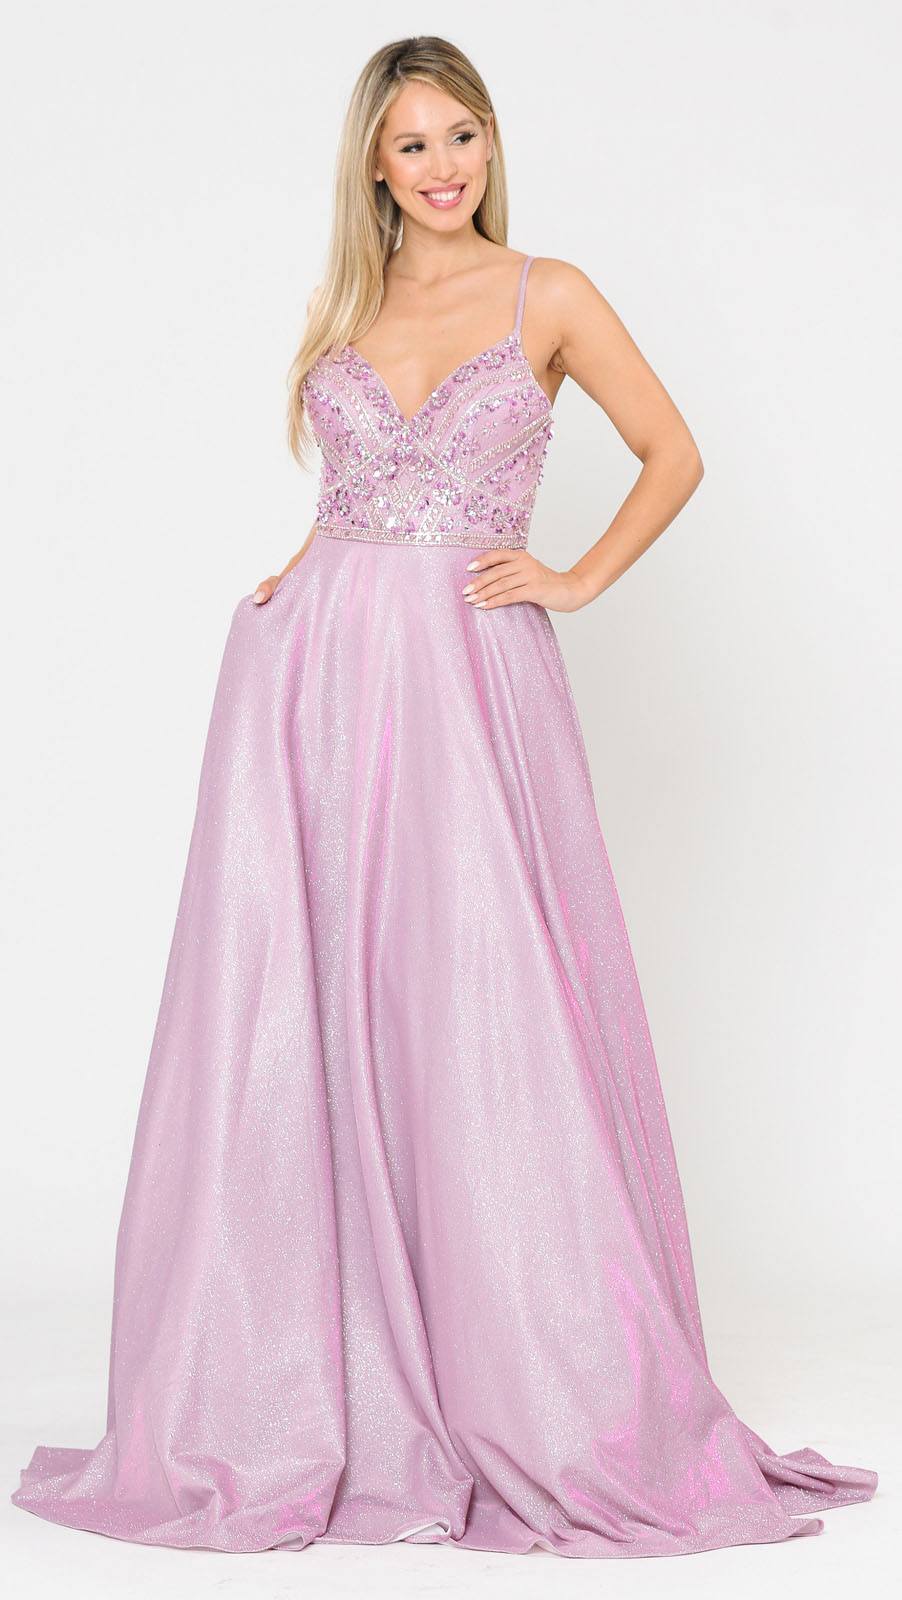 Poly USA 8414 Embellished Pink/Lilac Long Prom Dress with Pockets